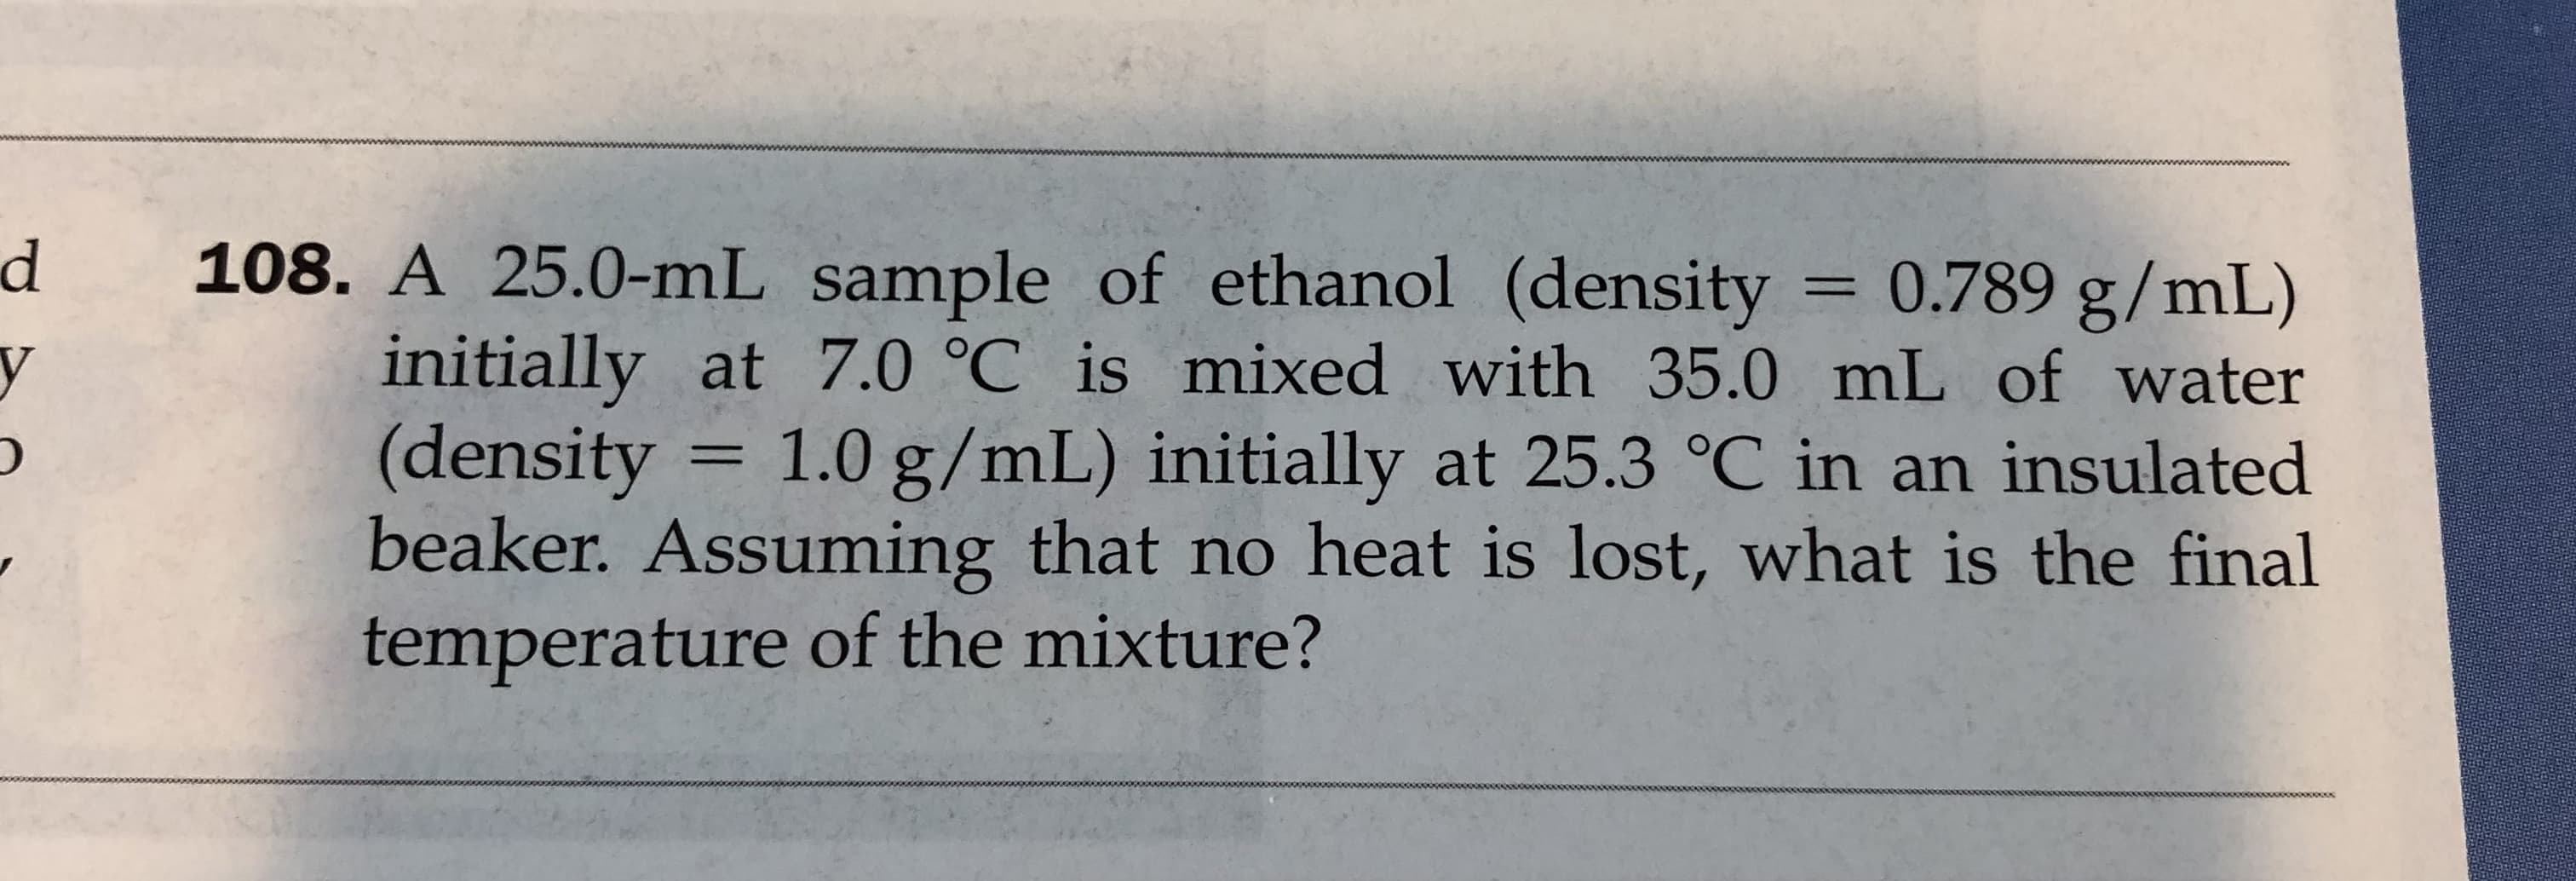 108. A 25.0-mL sample of ethanol (density
initially at 7.0 °C is mixed with 35.0 mL of water
(density
beaker. Assuming that no heat is lost, what is the final
temperature of the mixture?
0.789 g/mL)
1.0 g/mL) initially at 25.3 °C in an insulated
1
